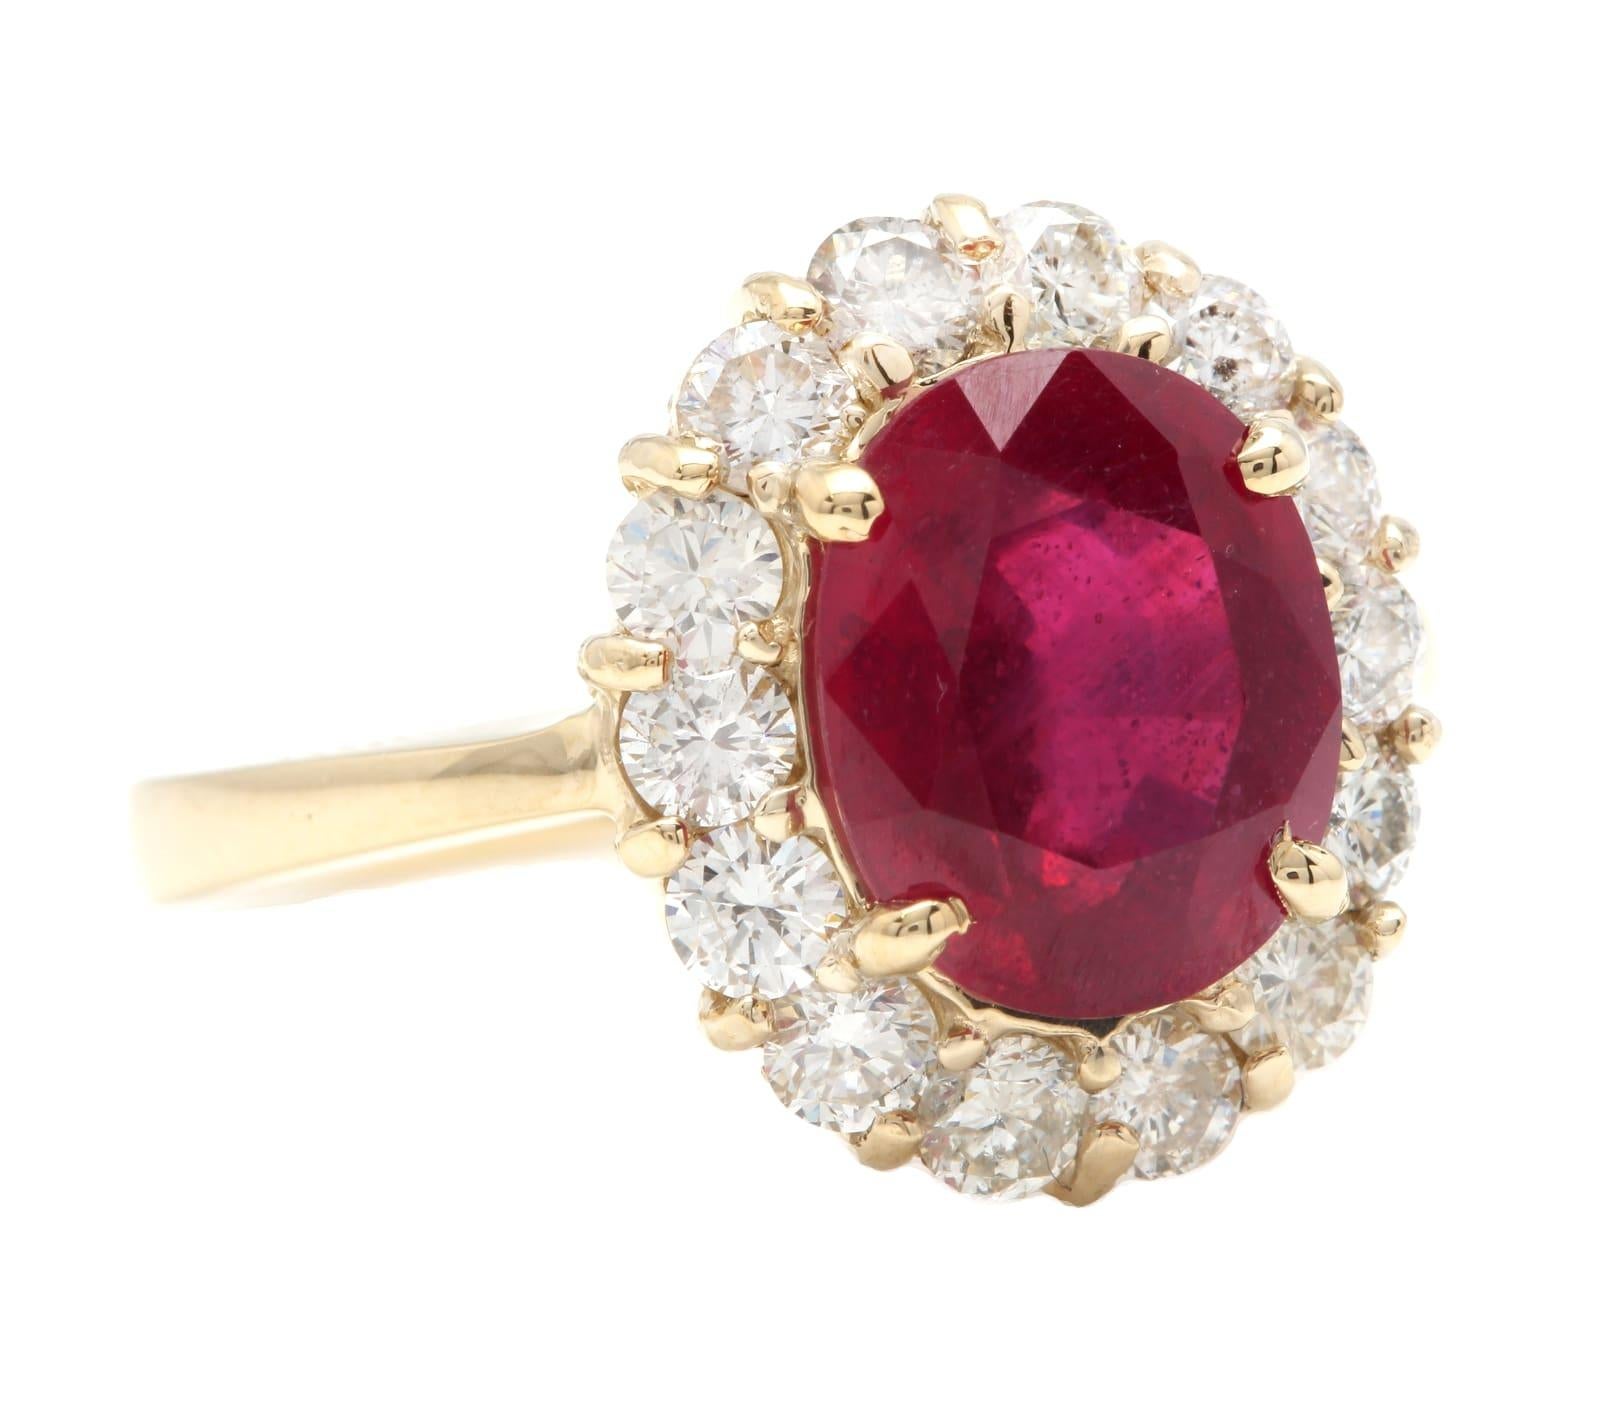 5.50 Carats Impressive Red Ruby and Natural Diamond 14K Yellow Gold Ring

Suggested Replacement Value: Approx. $5,000.00

Total Red Ruby Weight is: Approx. 4.50 Carats

Ruby Treatment: Lead Glass Filling

Ruby Measures: Approx. Approx. 10.00 x